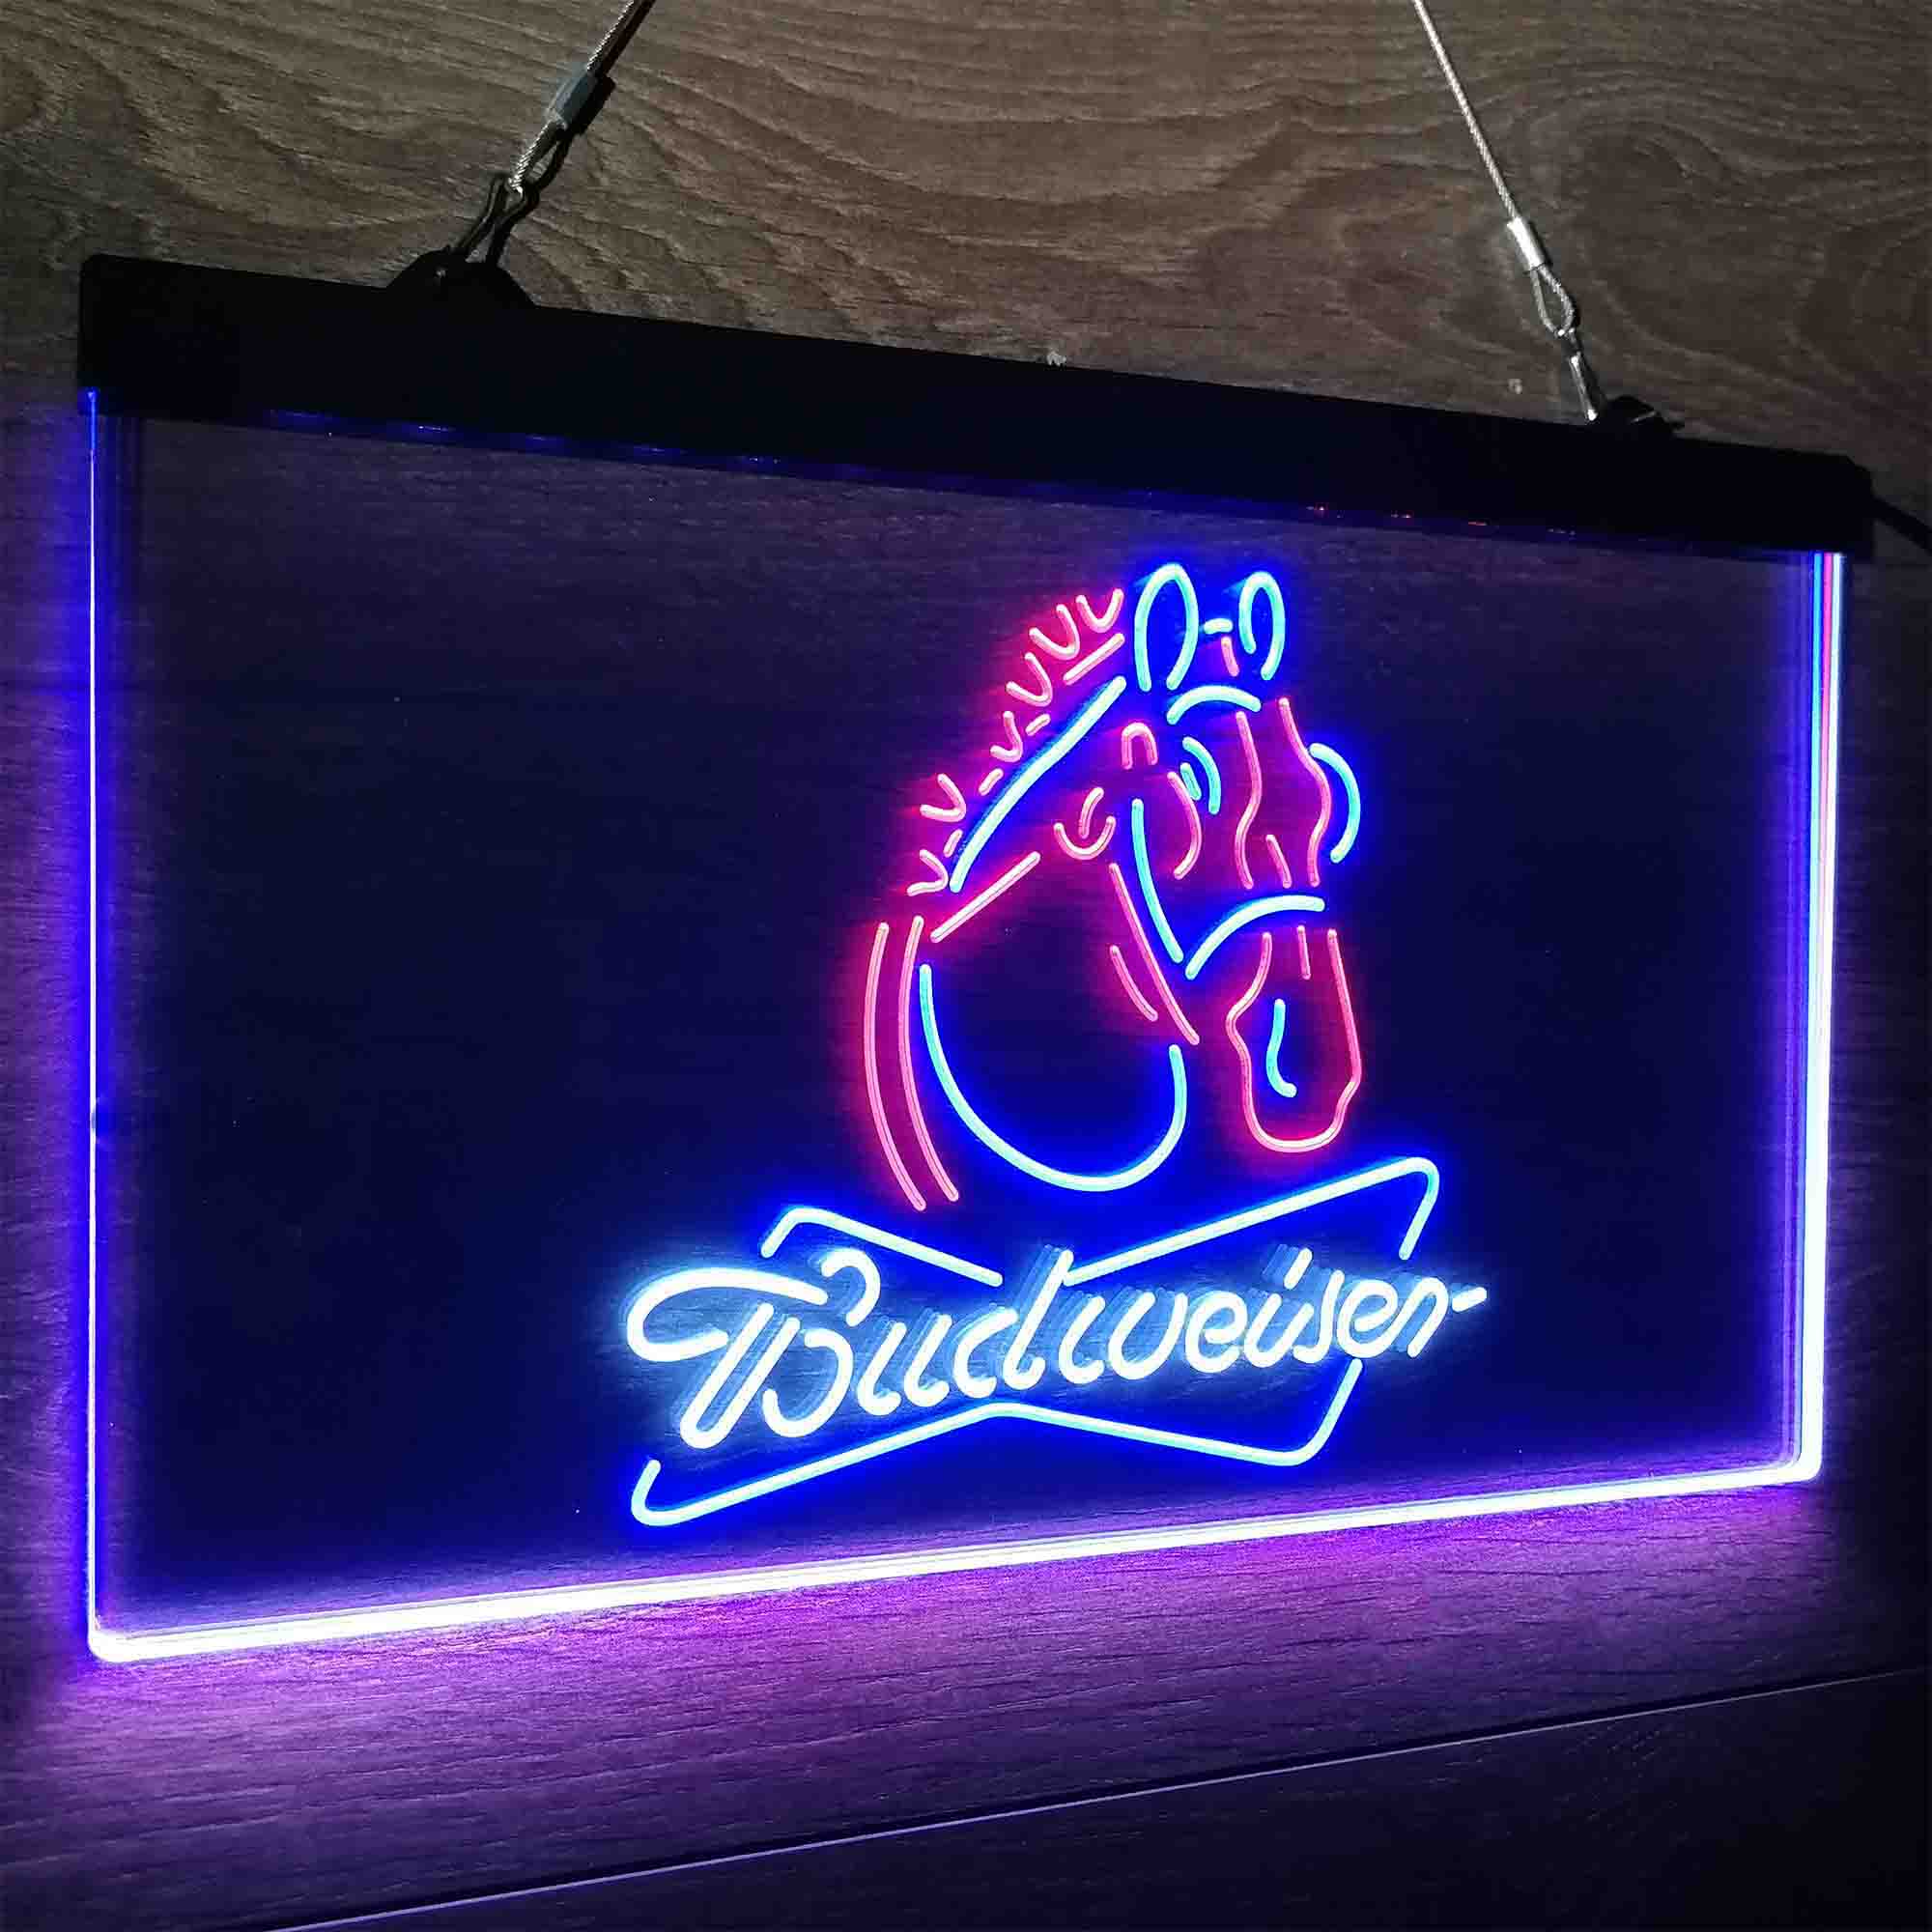 Budweiser Clydesdale Horse Head Neon LED Sign 3 Colors